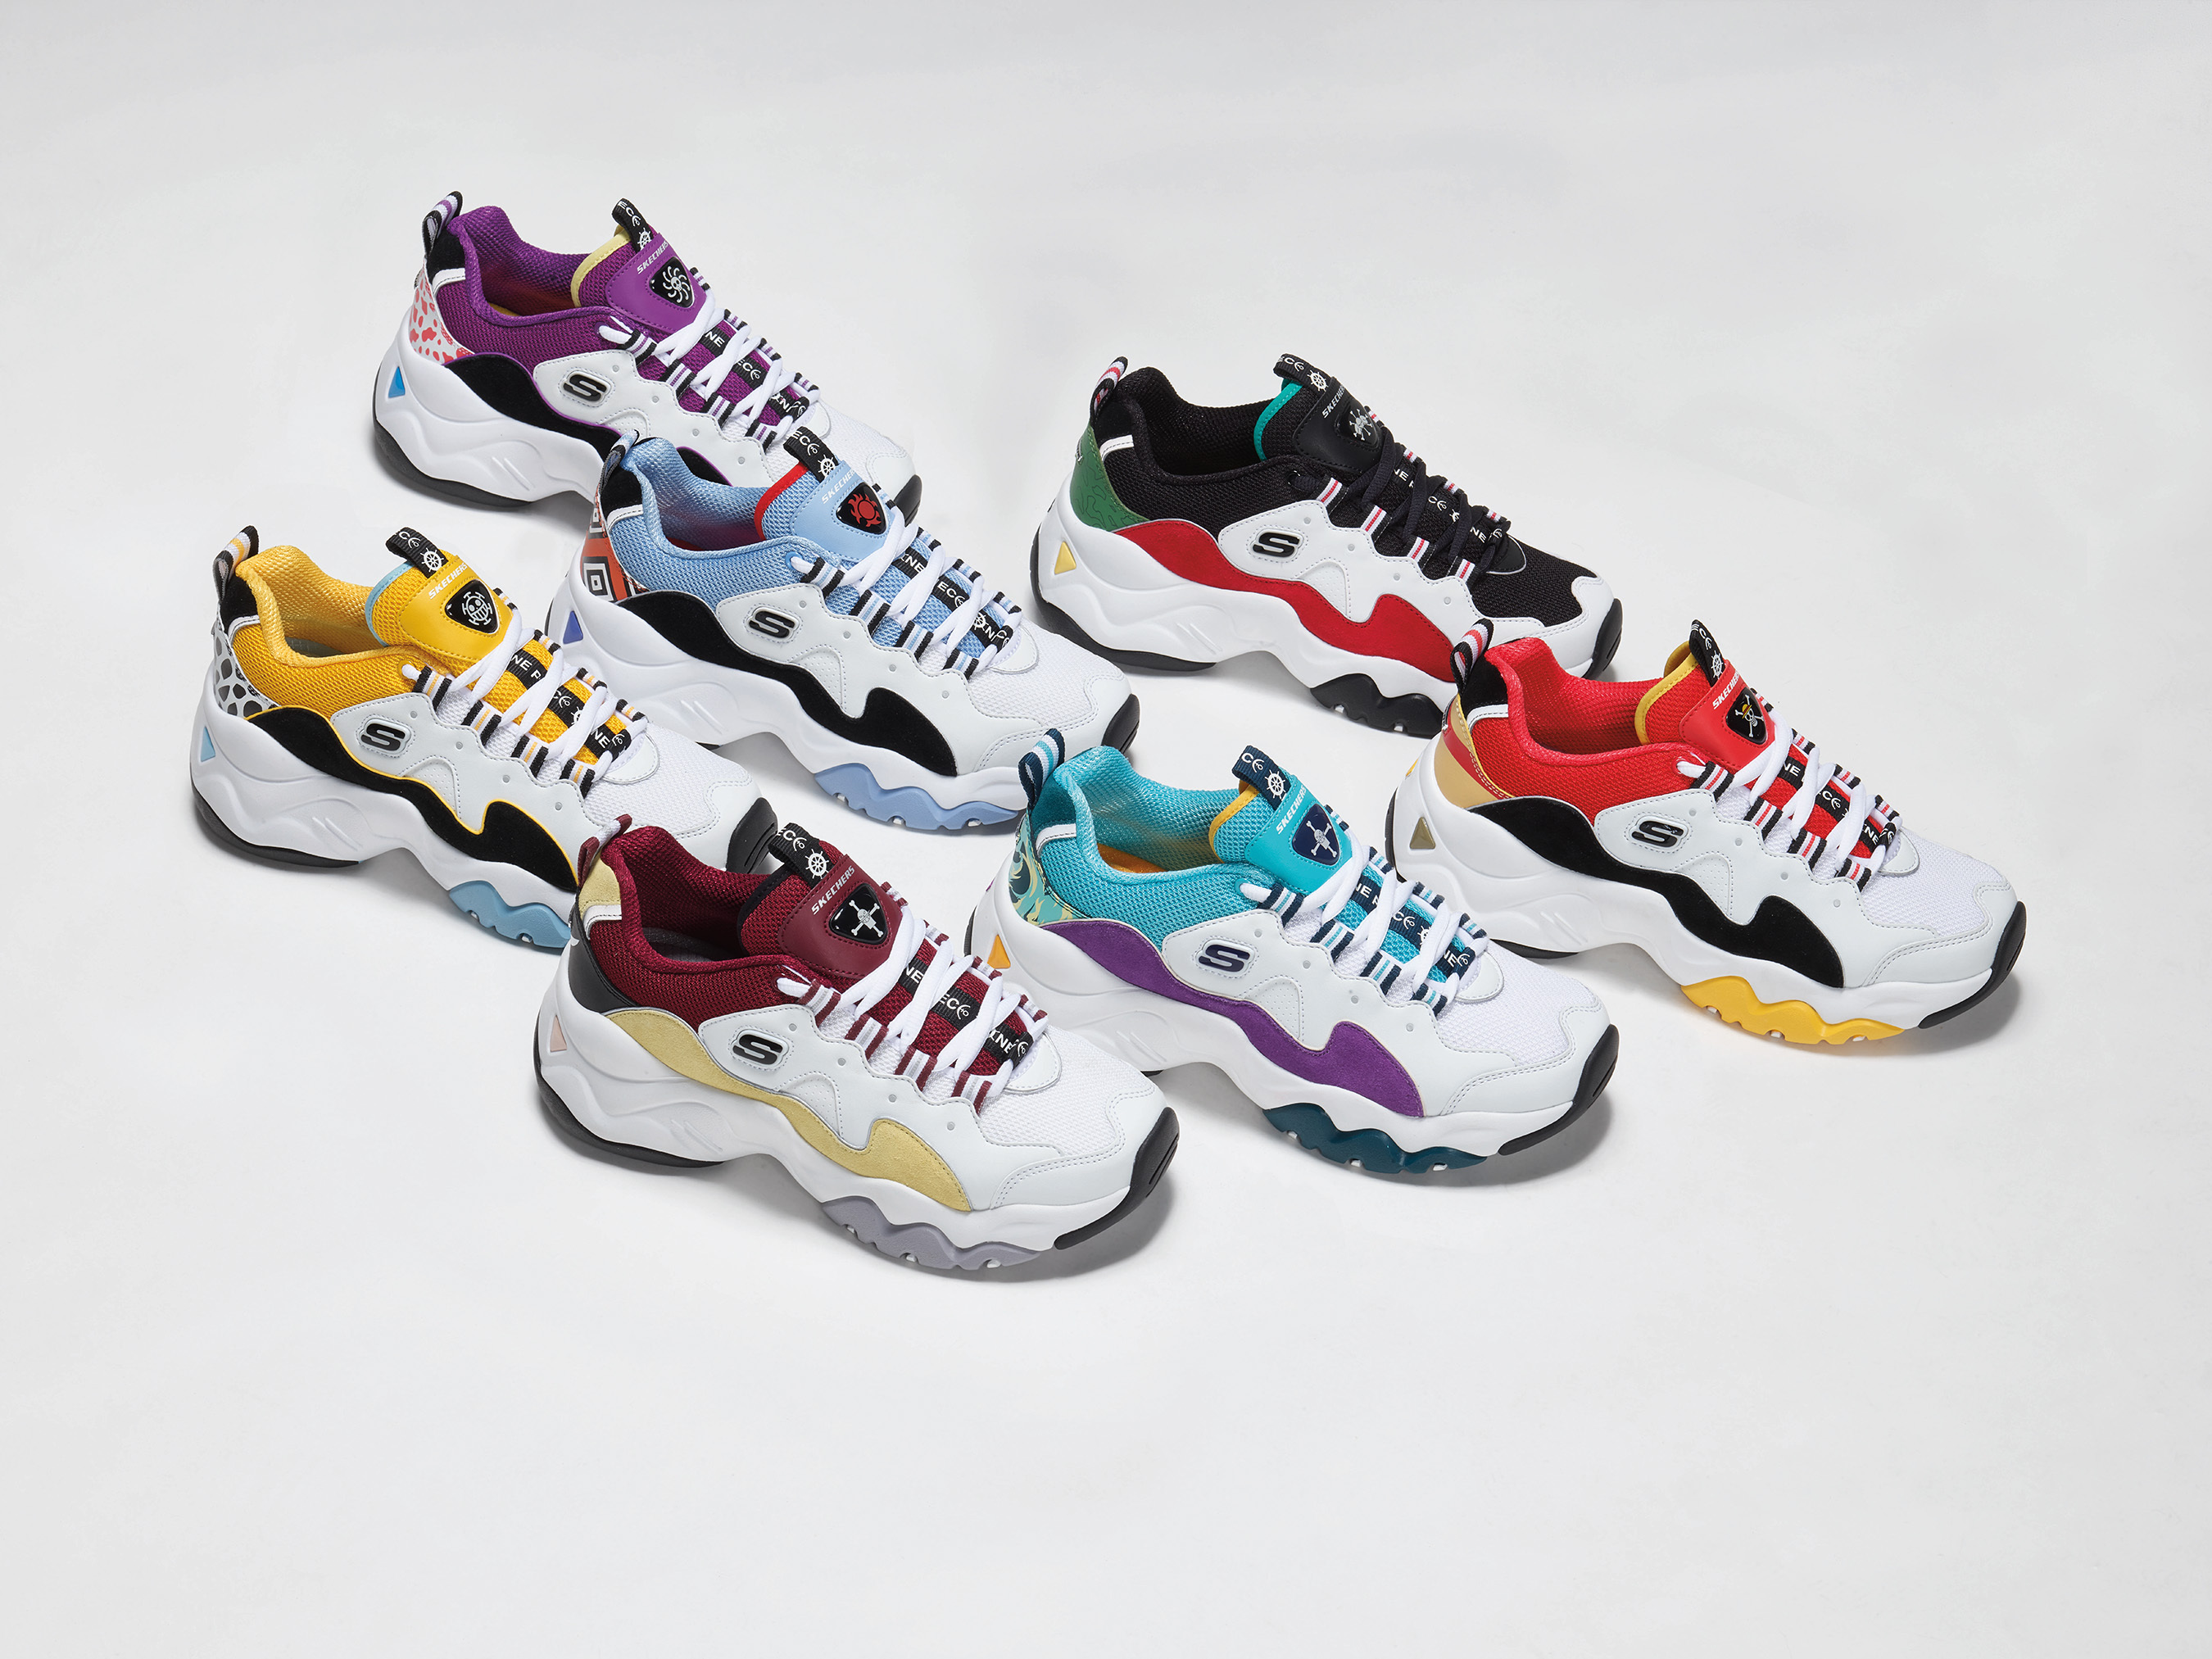 Skechers Shoes Based On Characters From 'One Piece' Manga Are Coming To ...